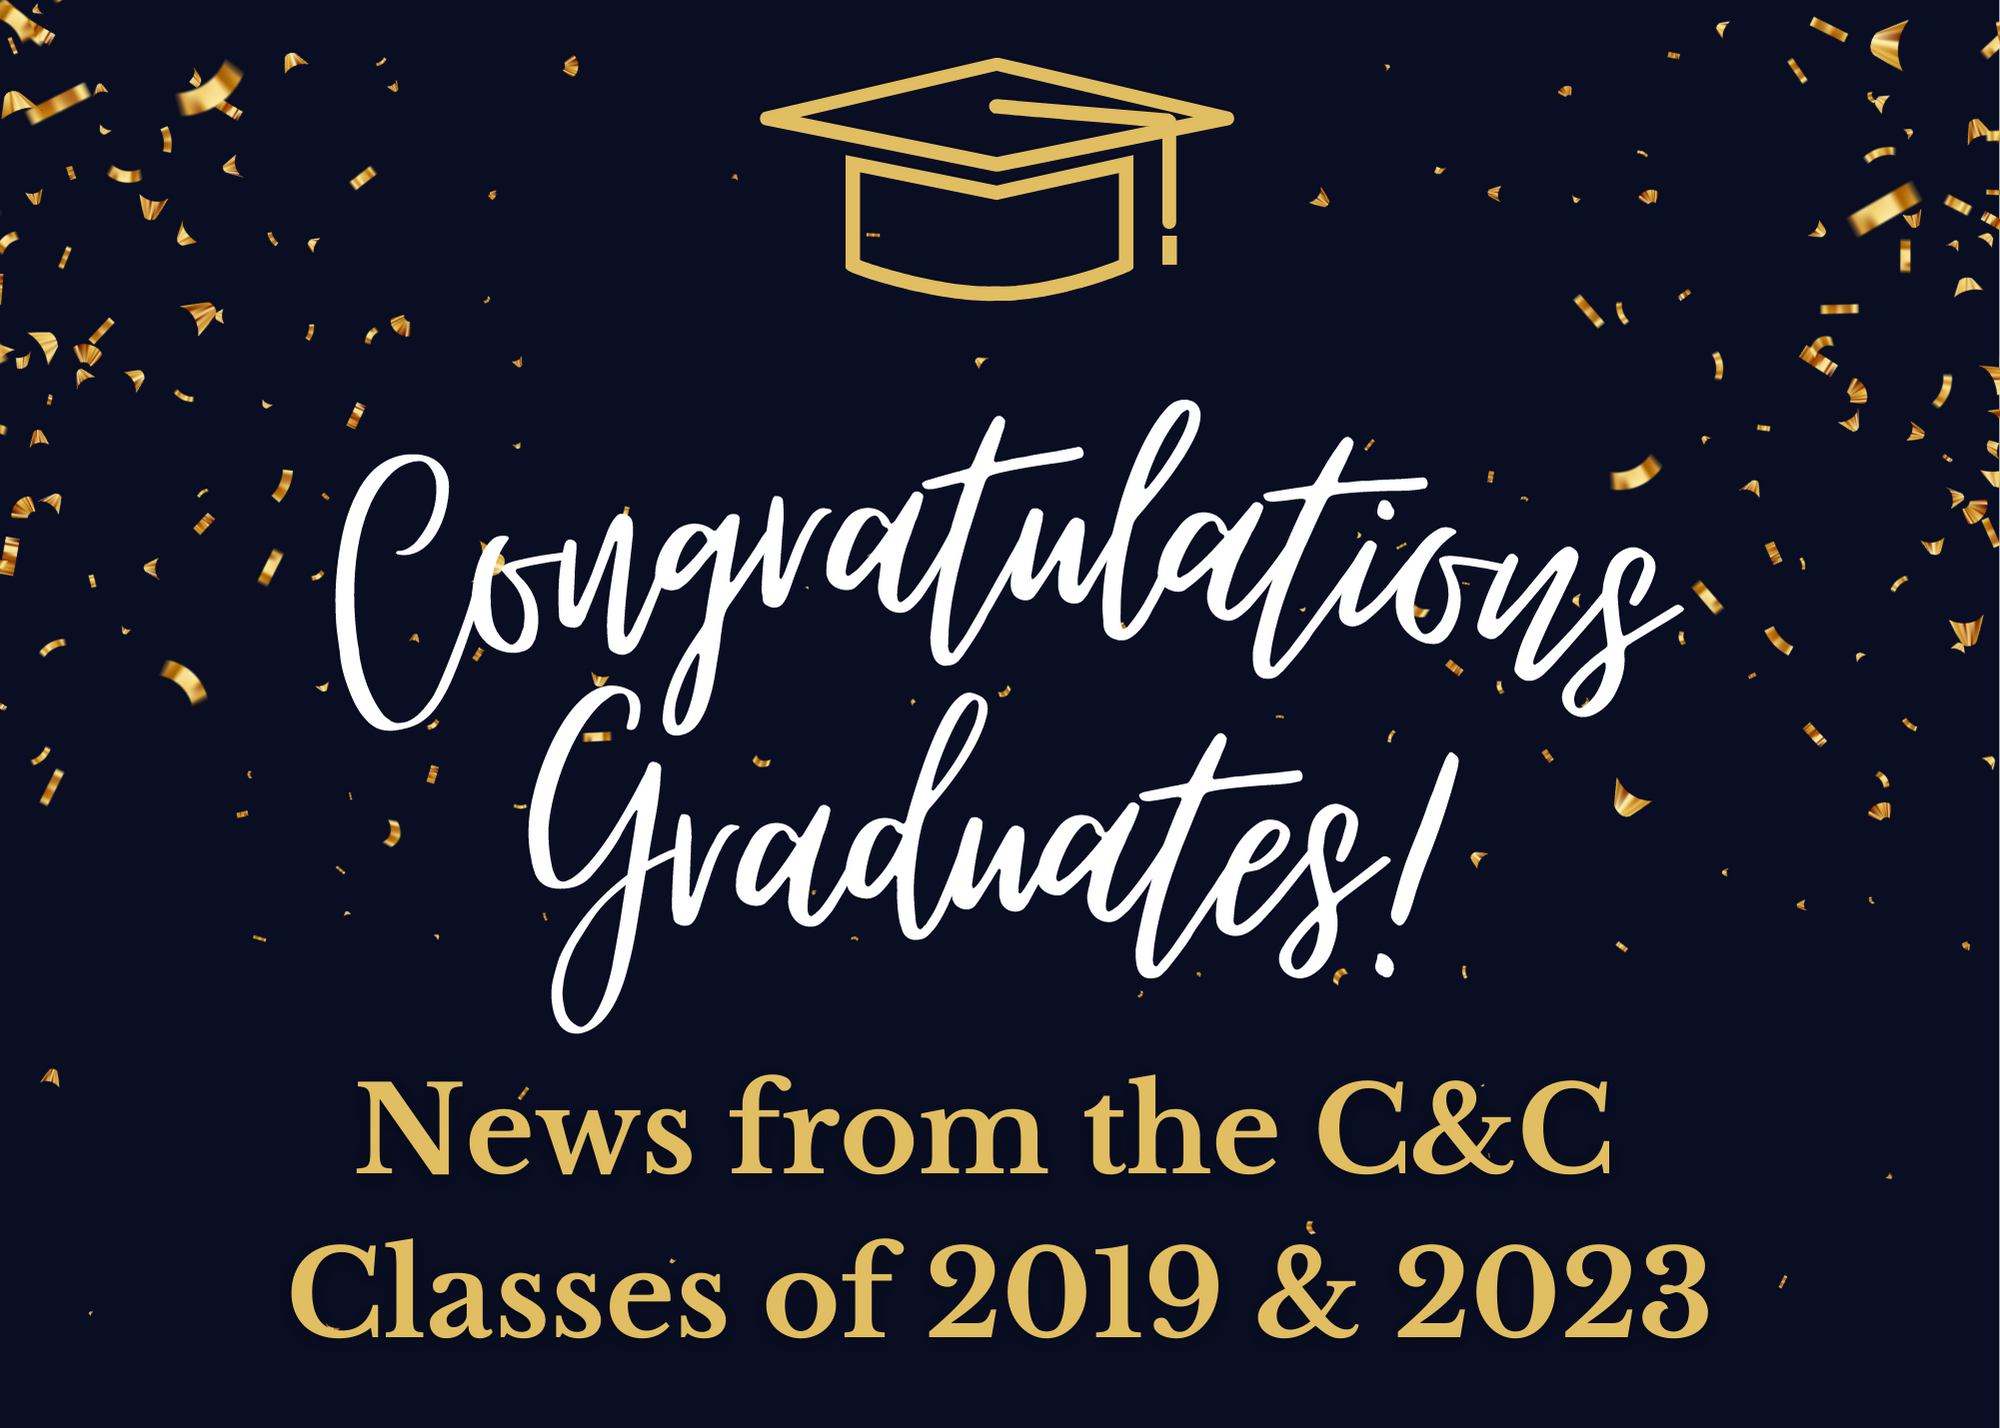 Salute to the C&C Classes of 2023 and 2019!